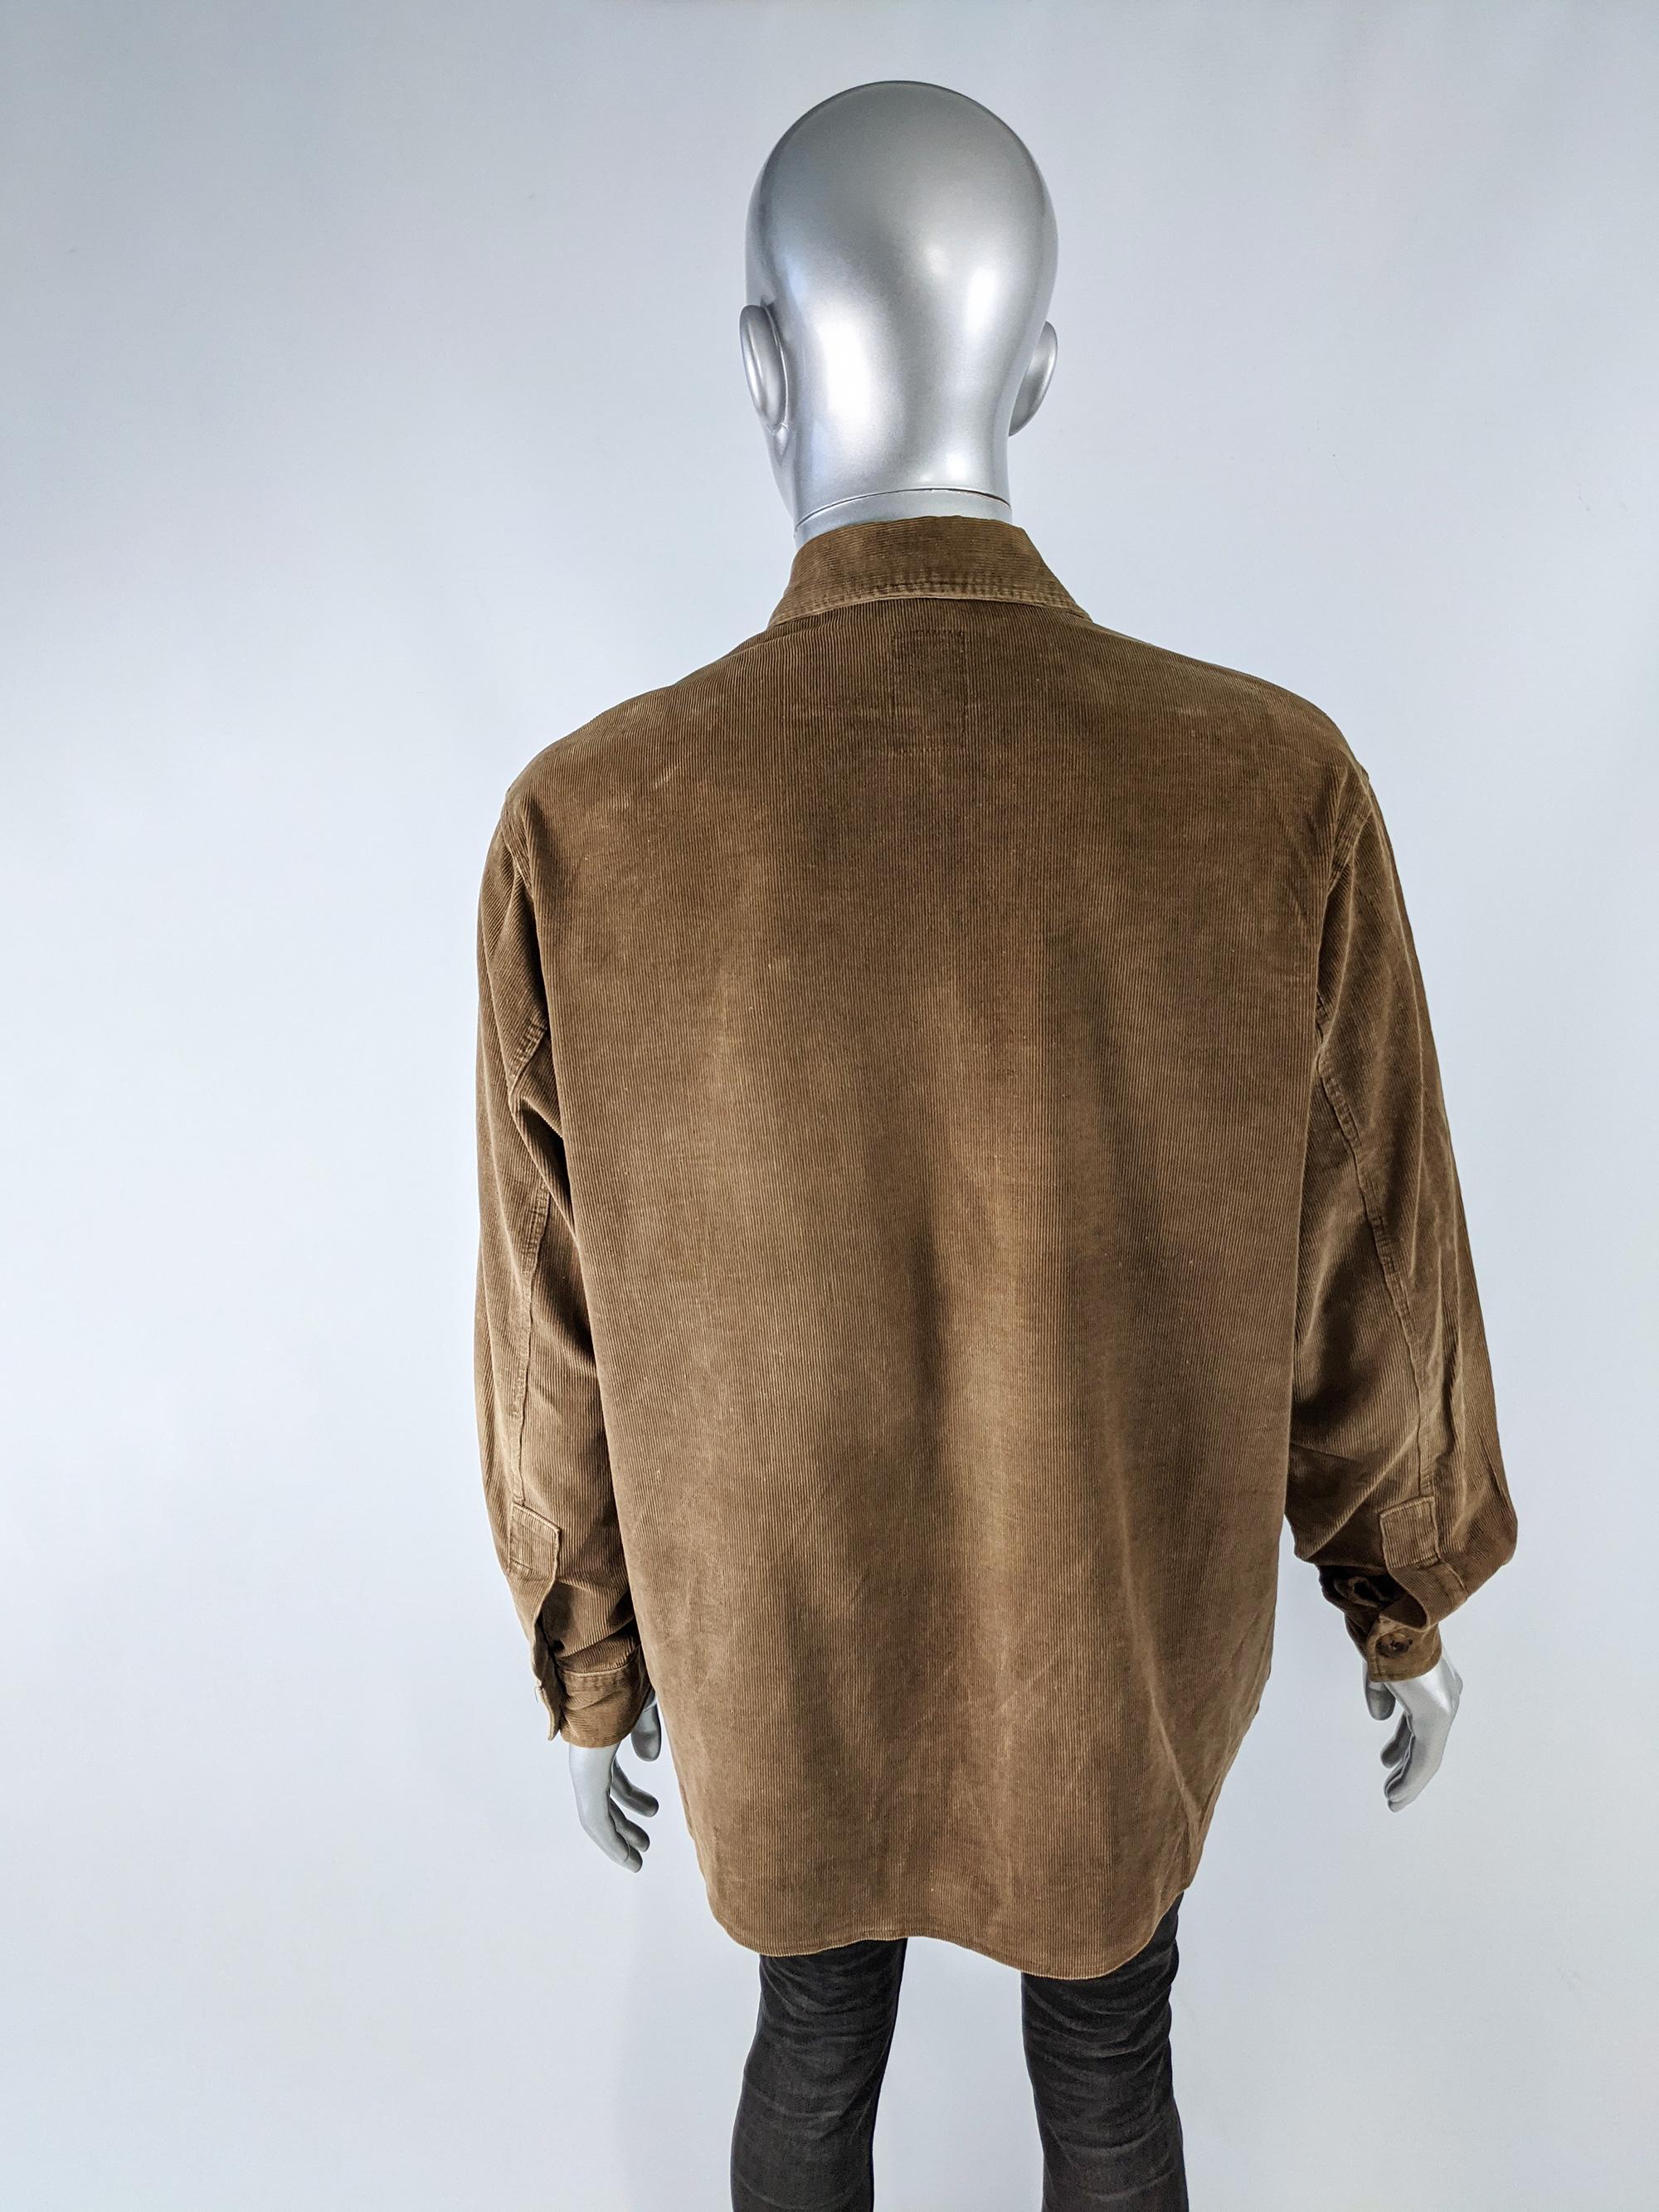 Joe Casely Hayford Vintage Brown Cord Shirt, 1990s For Sale 2